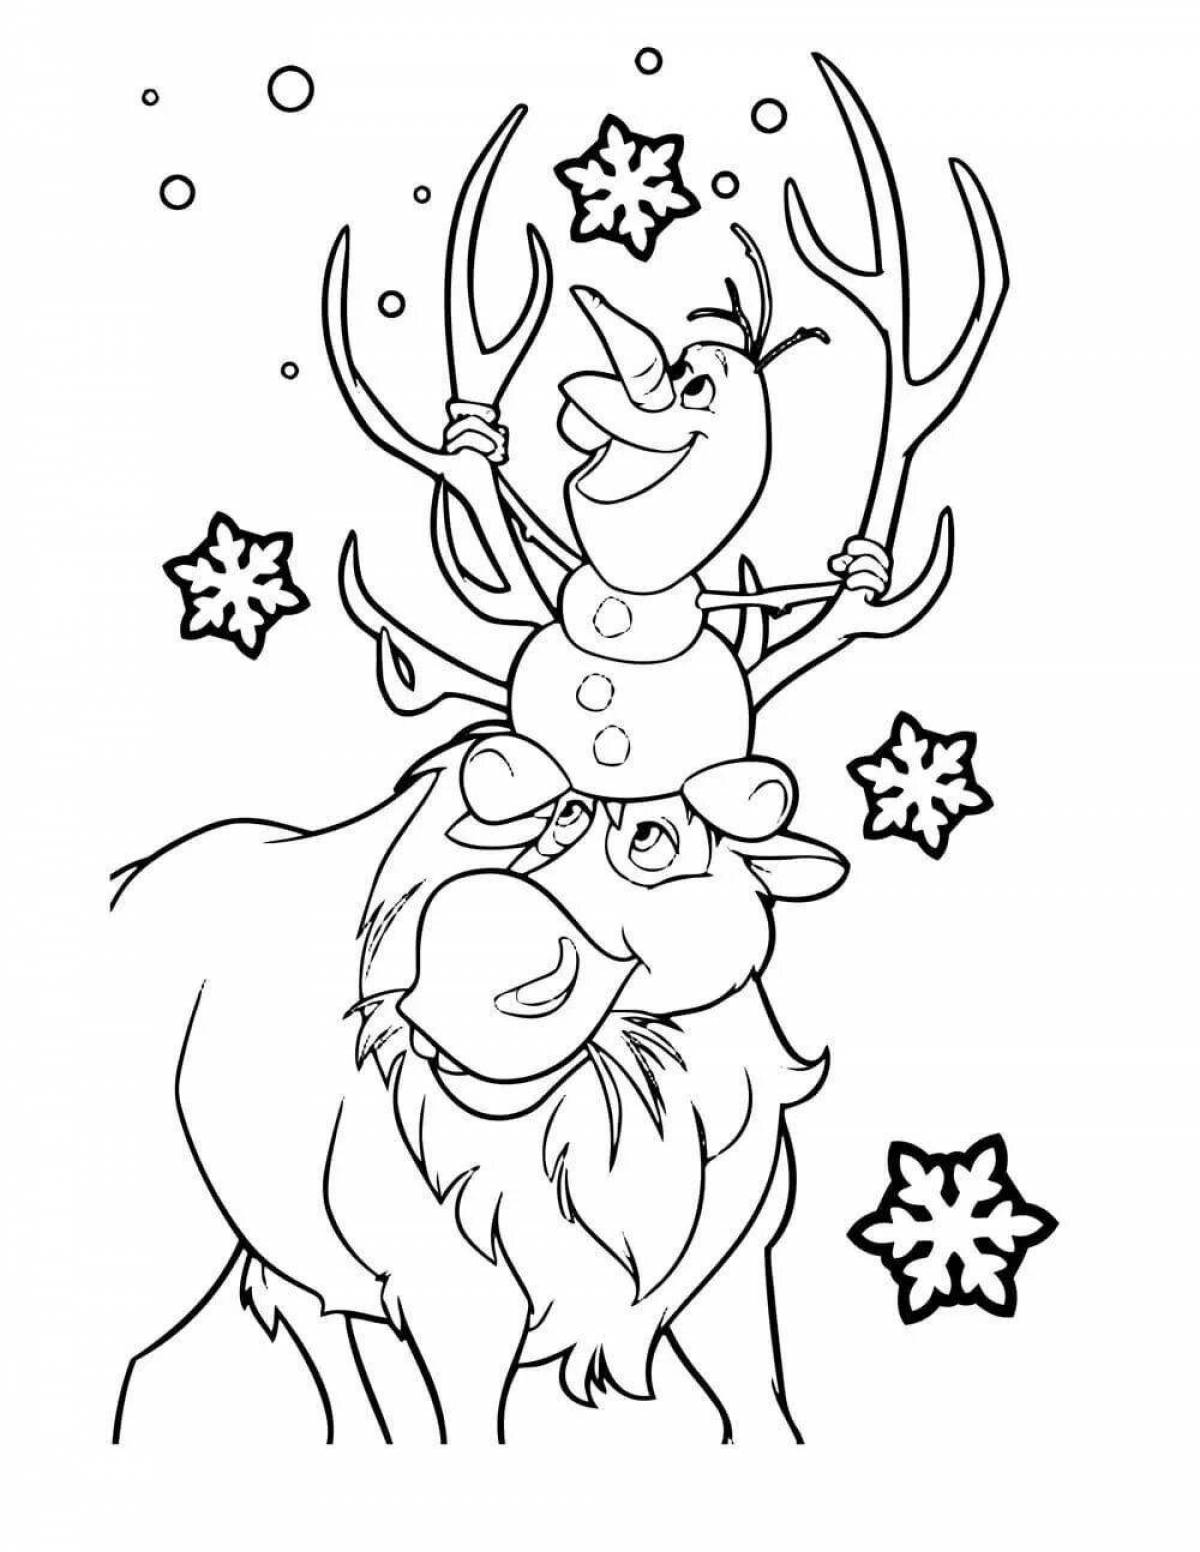 Adorable Christmas Reindeer Coloring Page